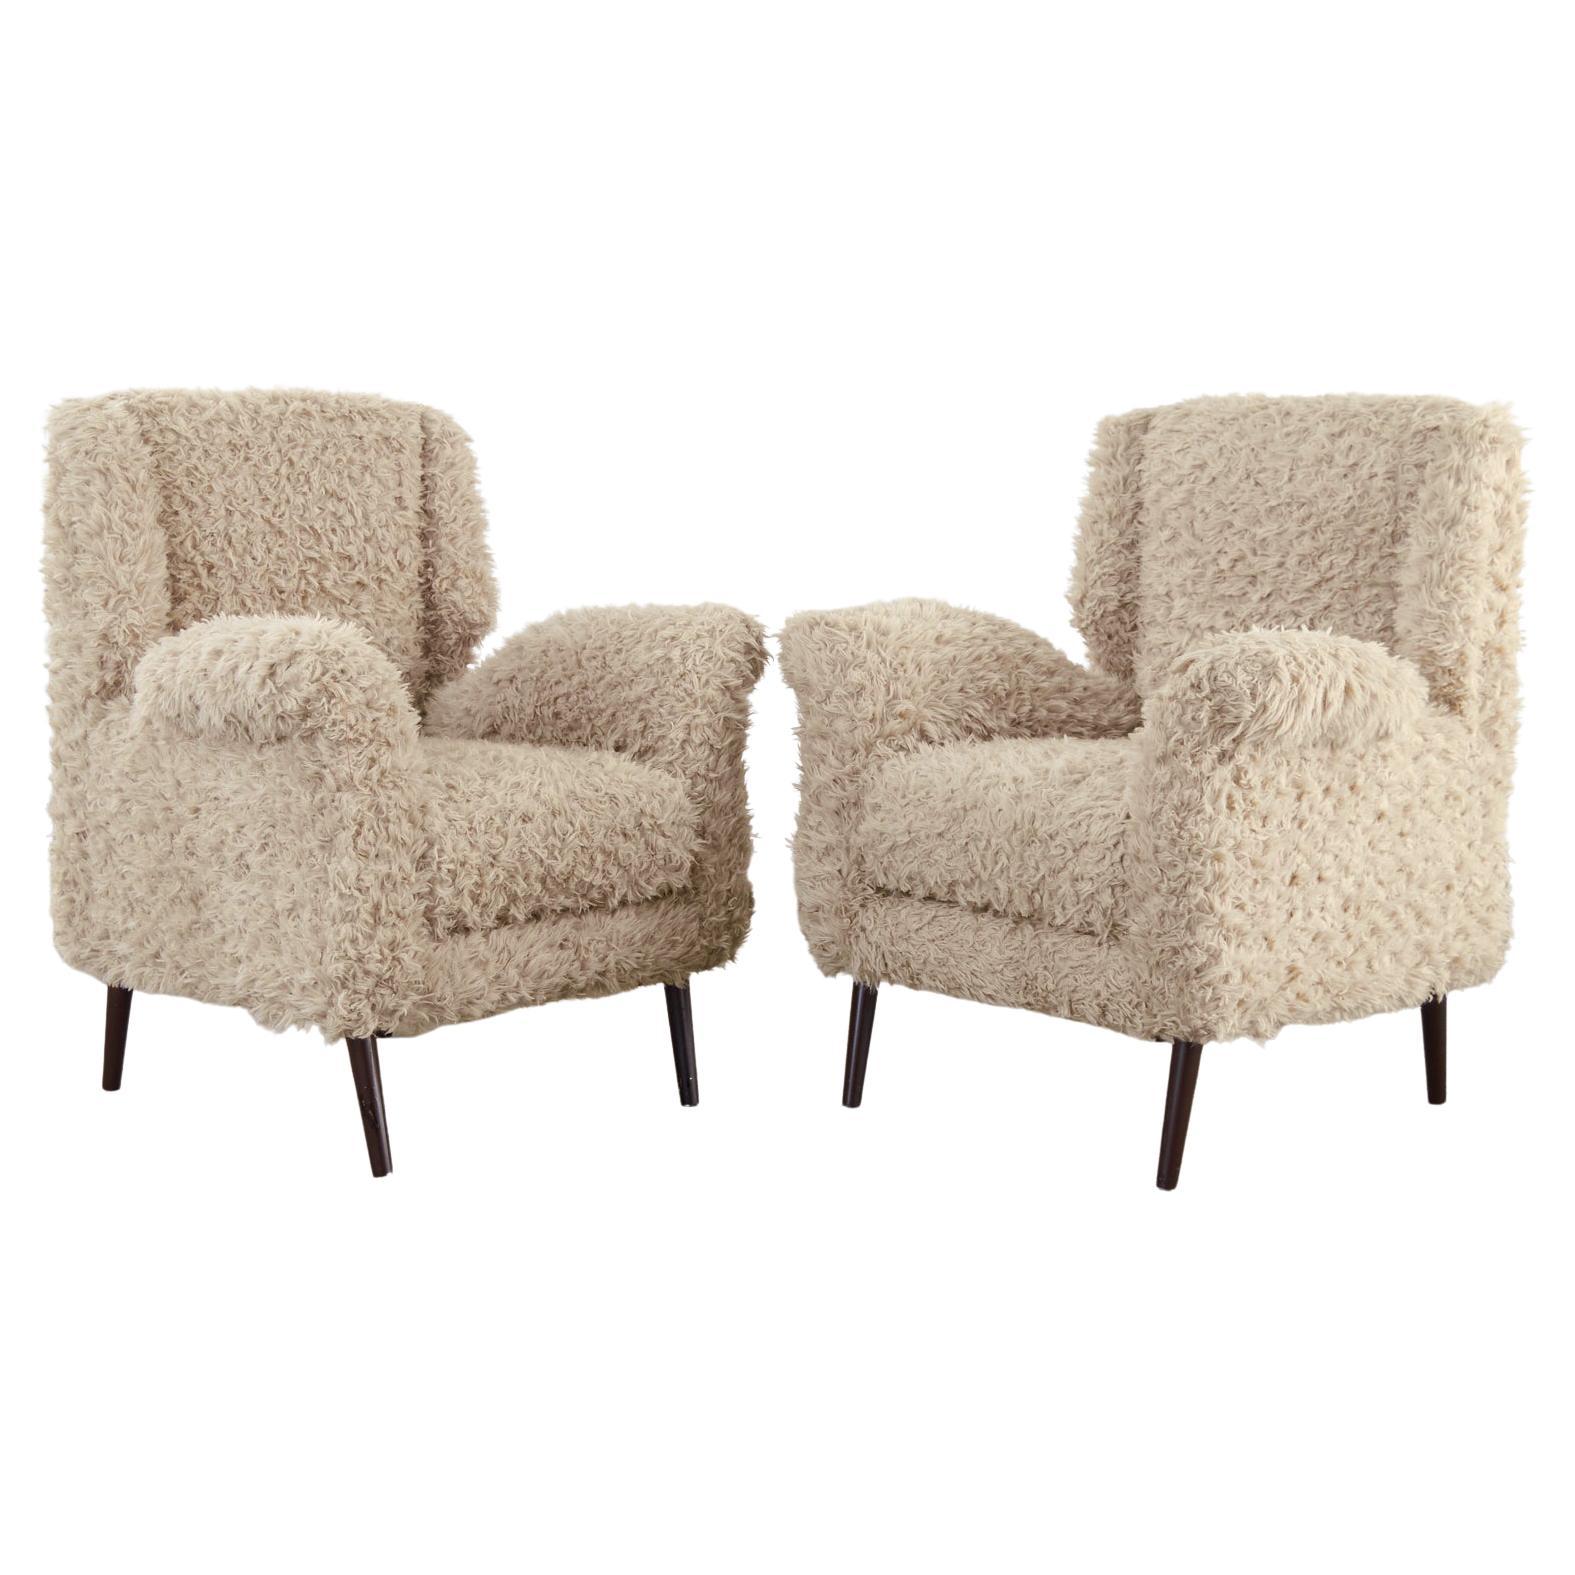 Pair of Midcentury Italian Faux Lambswool Teddy Bear Wingback Chairs